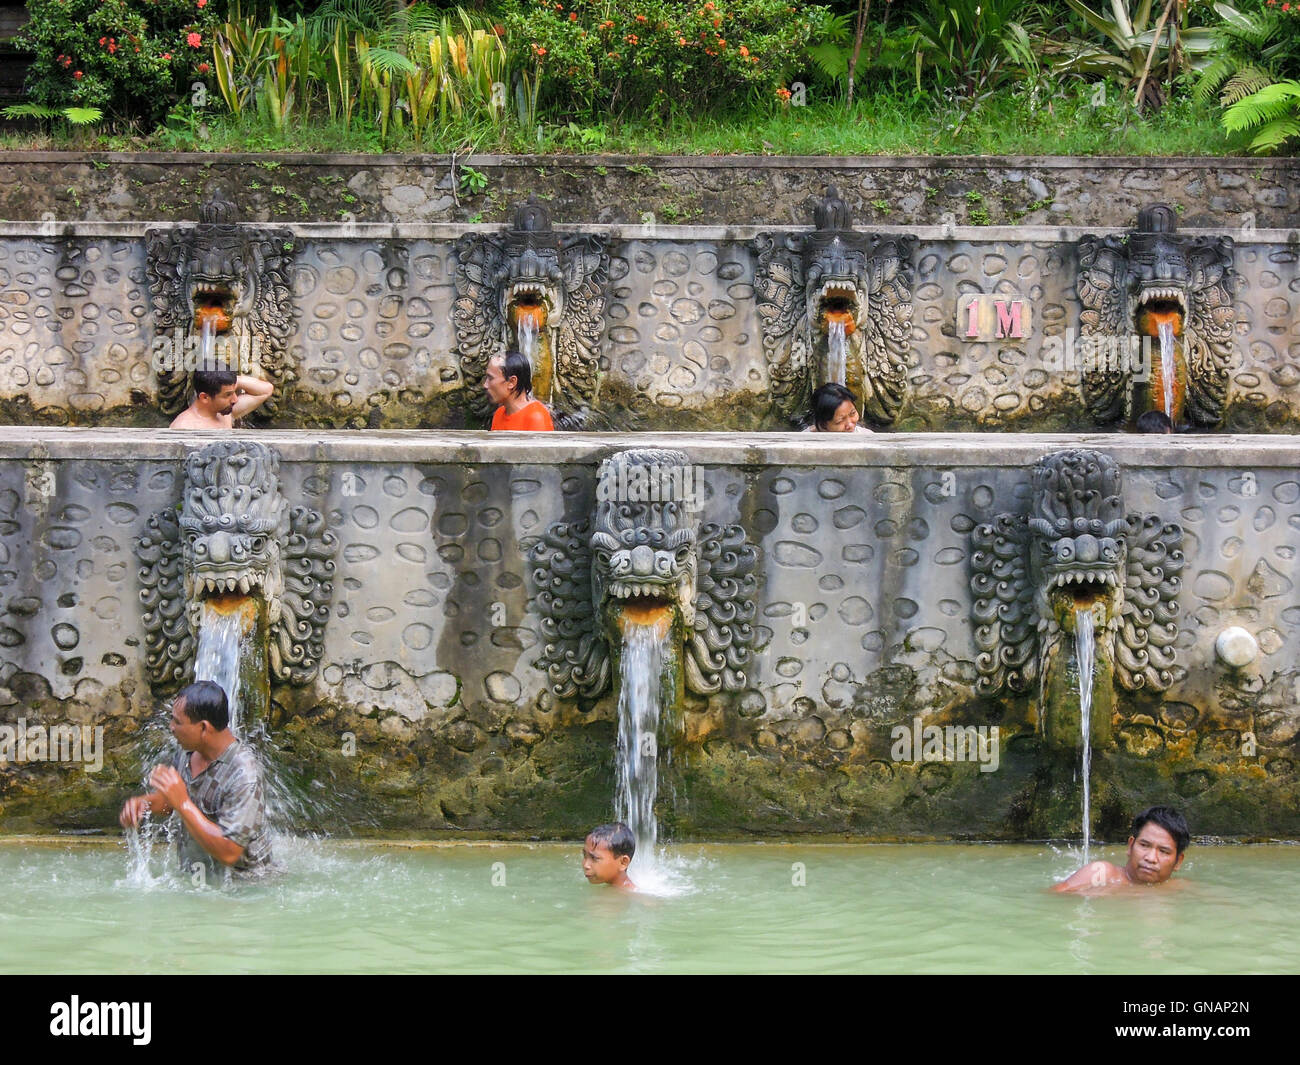 Banjar (Bali), Indonesia - 8 february 2013: People under the water jets of  the public pool at Banjar on the island of Bali, Indo Stock Photo - Alamy